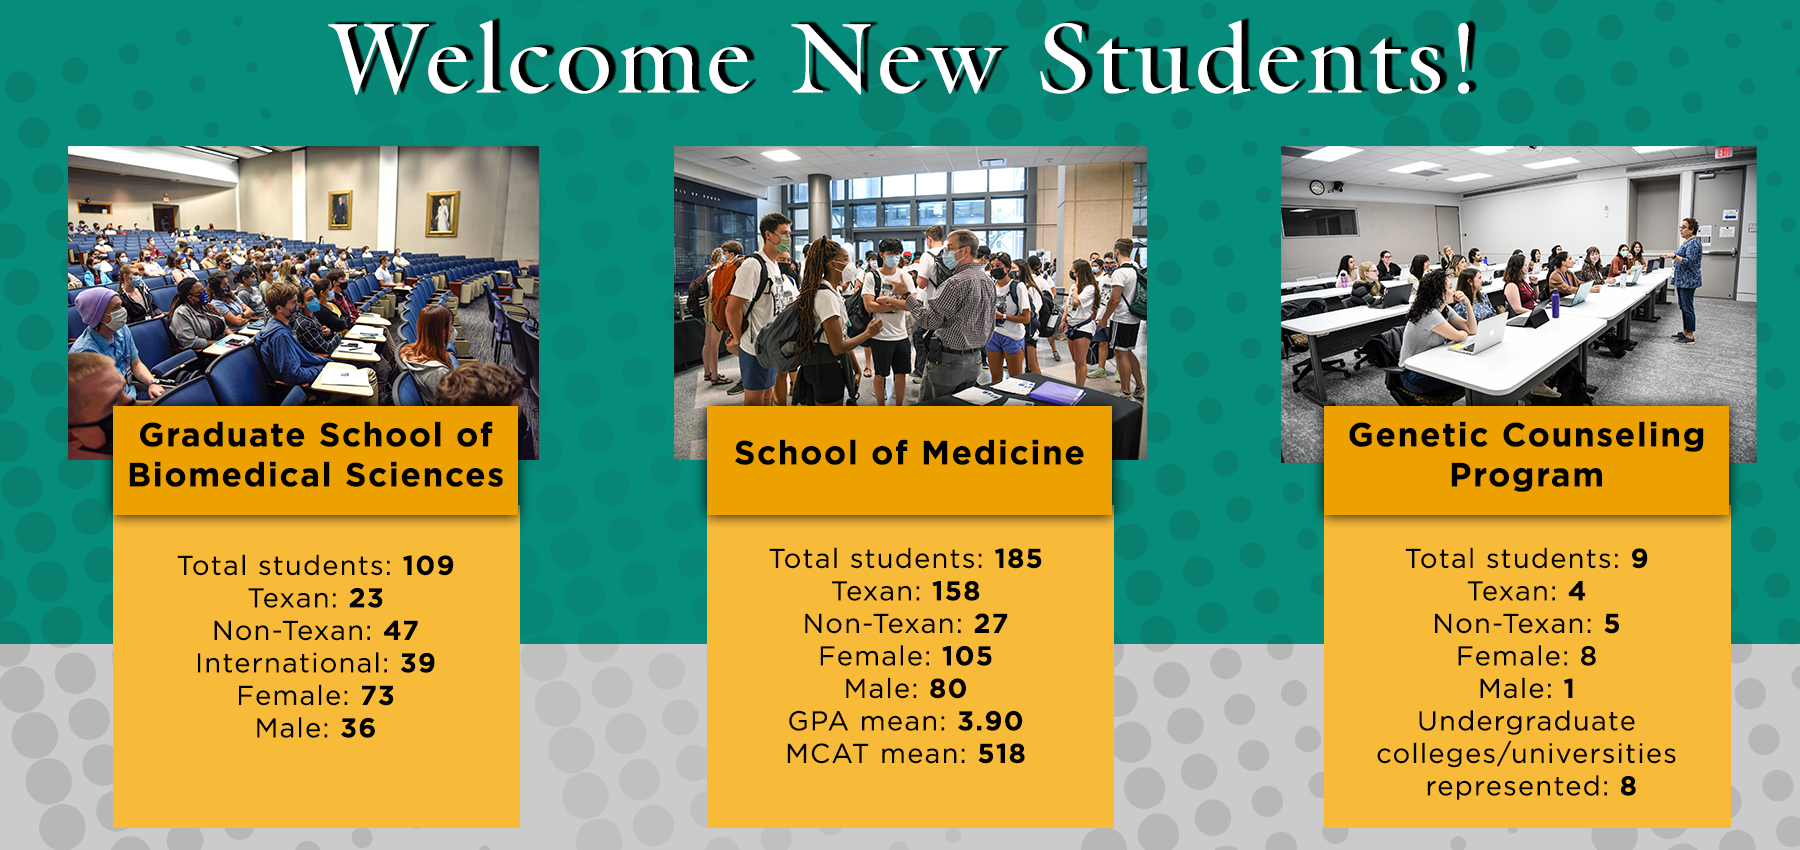 An infographic showing pictures of each class of new students along with stats from each class. The stats are - Graduate School of Biomedical Sciences: Total students, 109; Texan, 23; Non-Texan, 47; International, 39; Female, 73; Male, 36. School of Medicine: Total students, 185; Texans, 158; Non-Texan, 27; Female, 105; Male, 80; GPA mean, 3.90; MCAT mean, 518. Genetic Counseling Program: Total students, 9; Texan, 4; Non-Texan, 5; Female, 8; Male, 1; Undergraduate colleges / universities represented, 8.